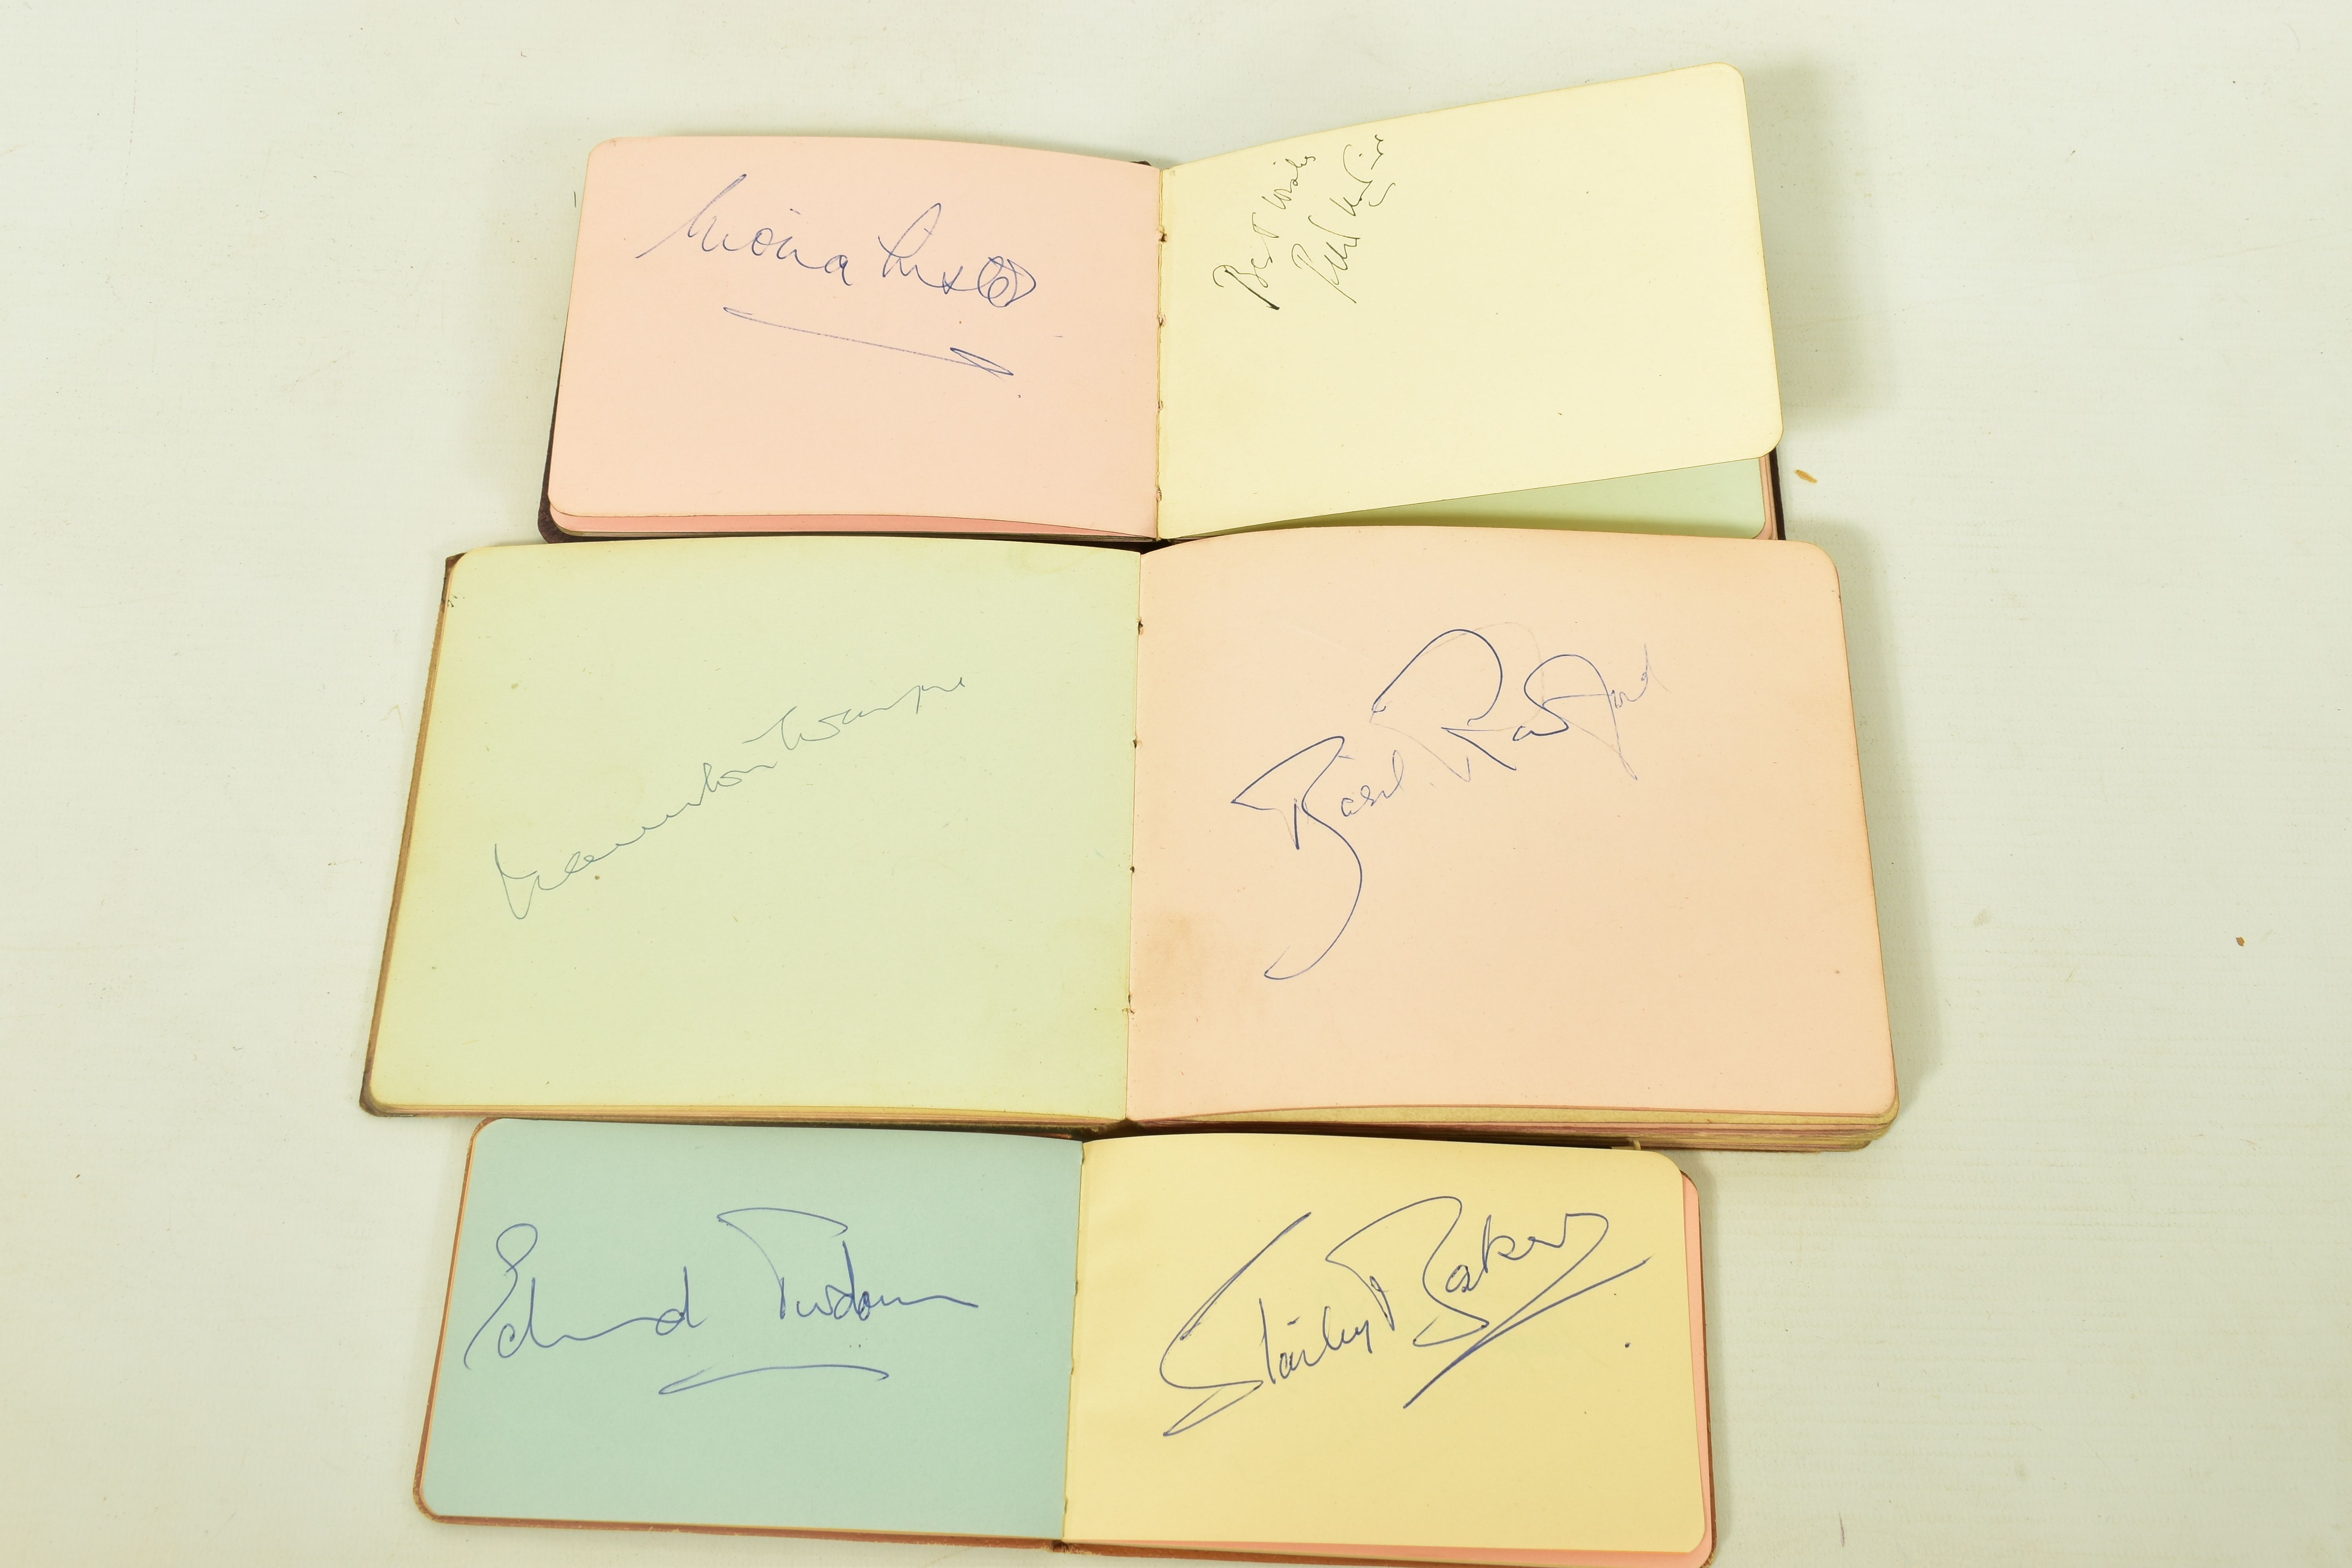 FILM & STAGE AUTOGRAPH ALBUM, a collection of signatures in three autograph albums featuring some of - Image 9 of 10